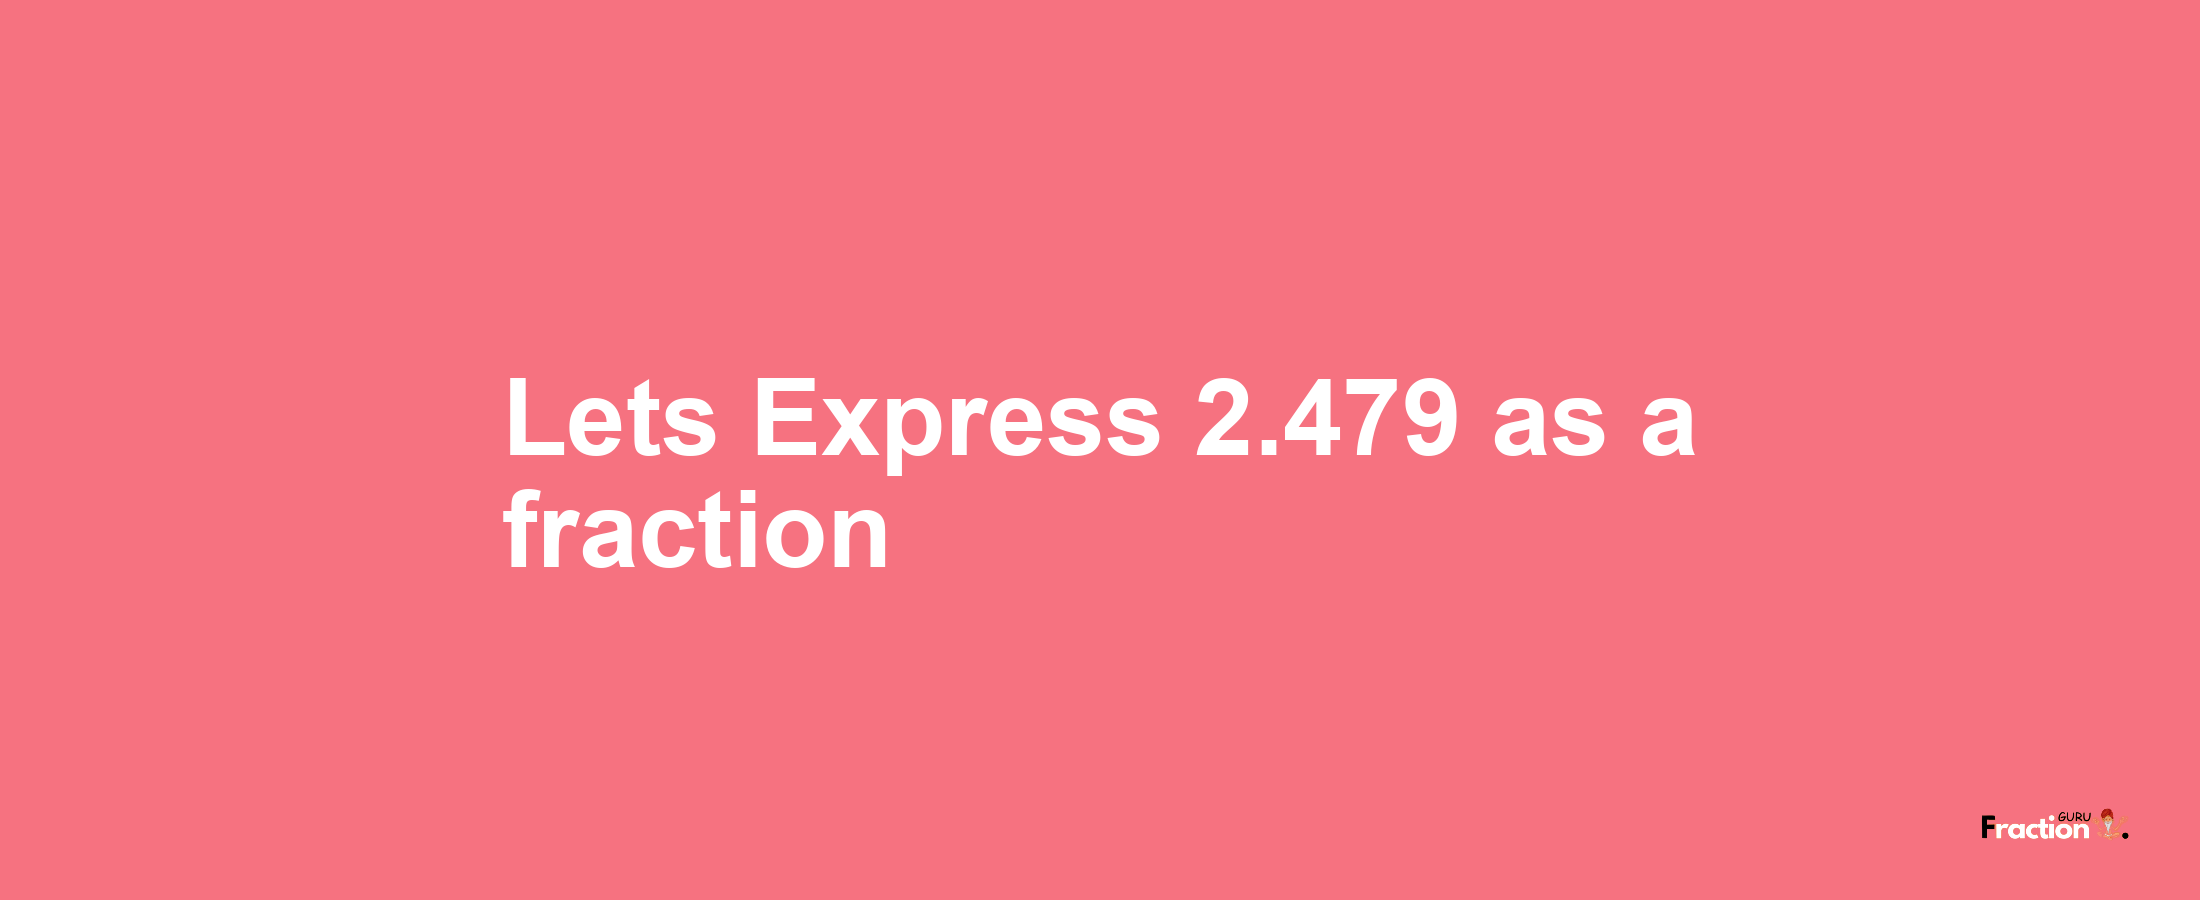 Lets Express 2.479 as afraction